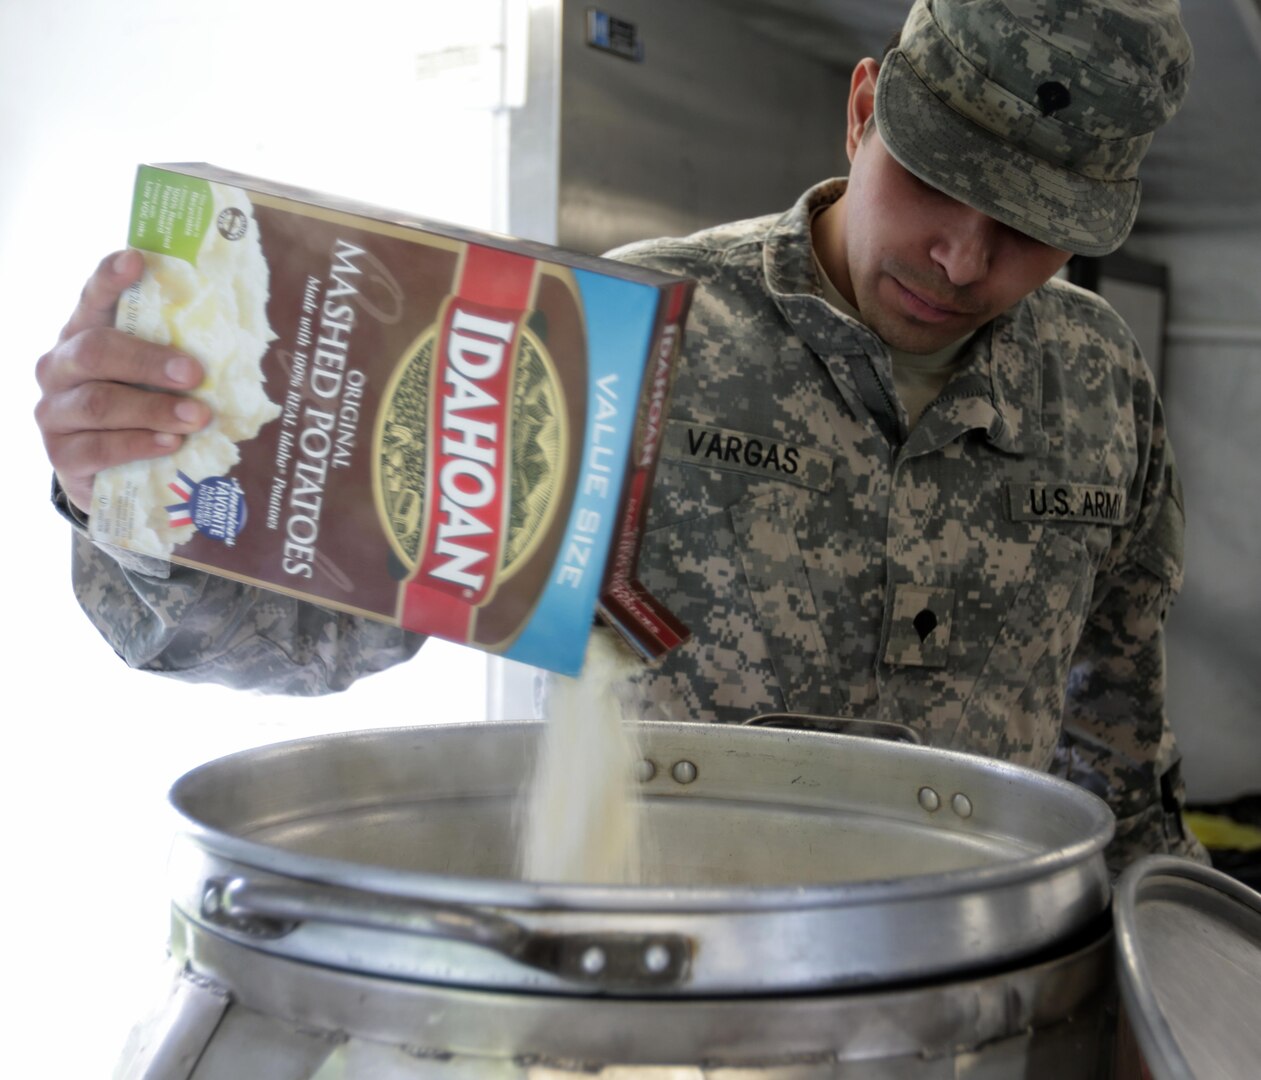 New York Army National Guard Private Spc. Ramon Vargas, a food service specialist with the 642nd Aviation Service Battalion, adds mashed potato mix to a pot of boiling water during the state level Phillip A. Connelly Competition at Camp Smith Training Site on April 29, 2016.  



